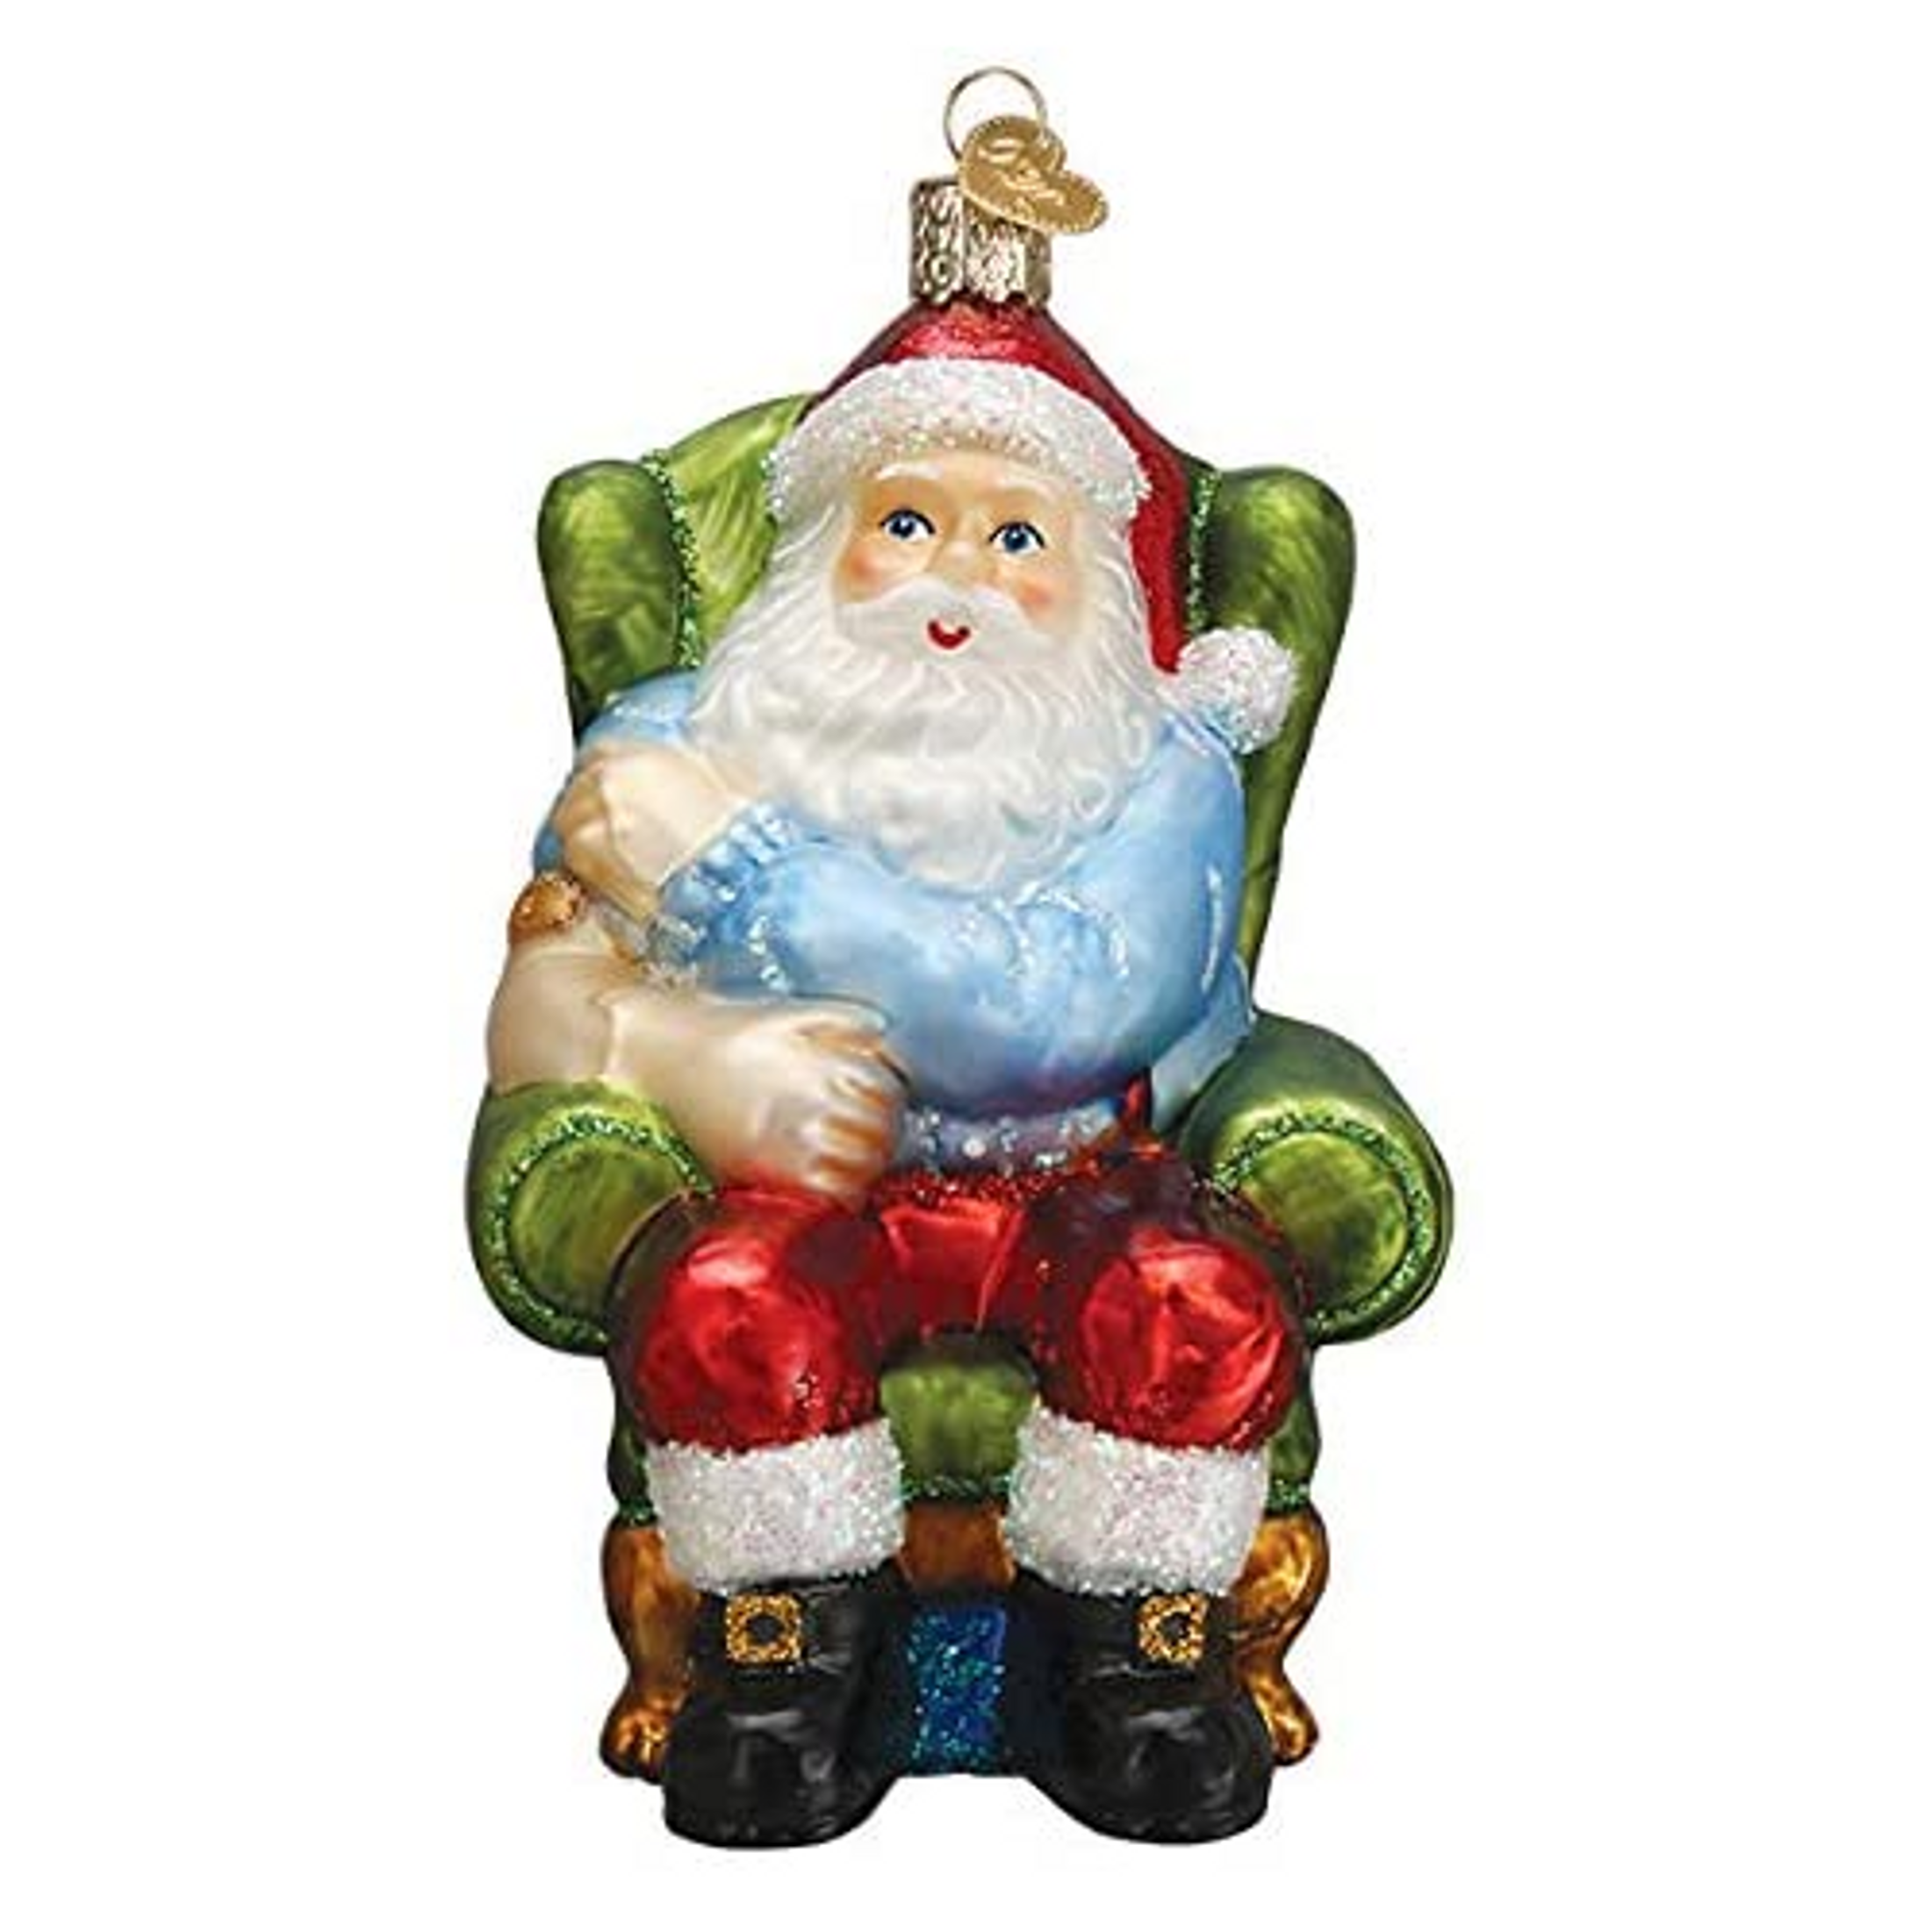 Old World Christmas Glass Blown Ornament for Christmas Tree, Santa Vaccinated (With OWC Gift Box)